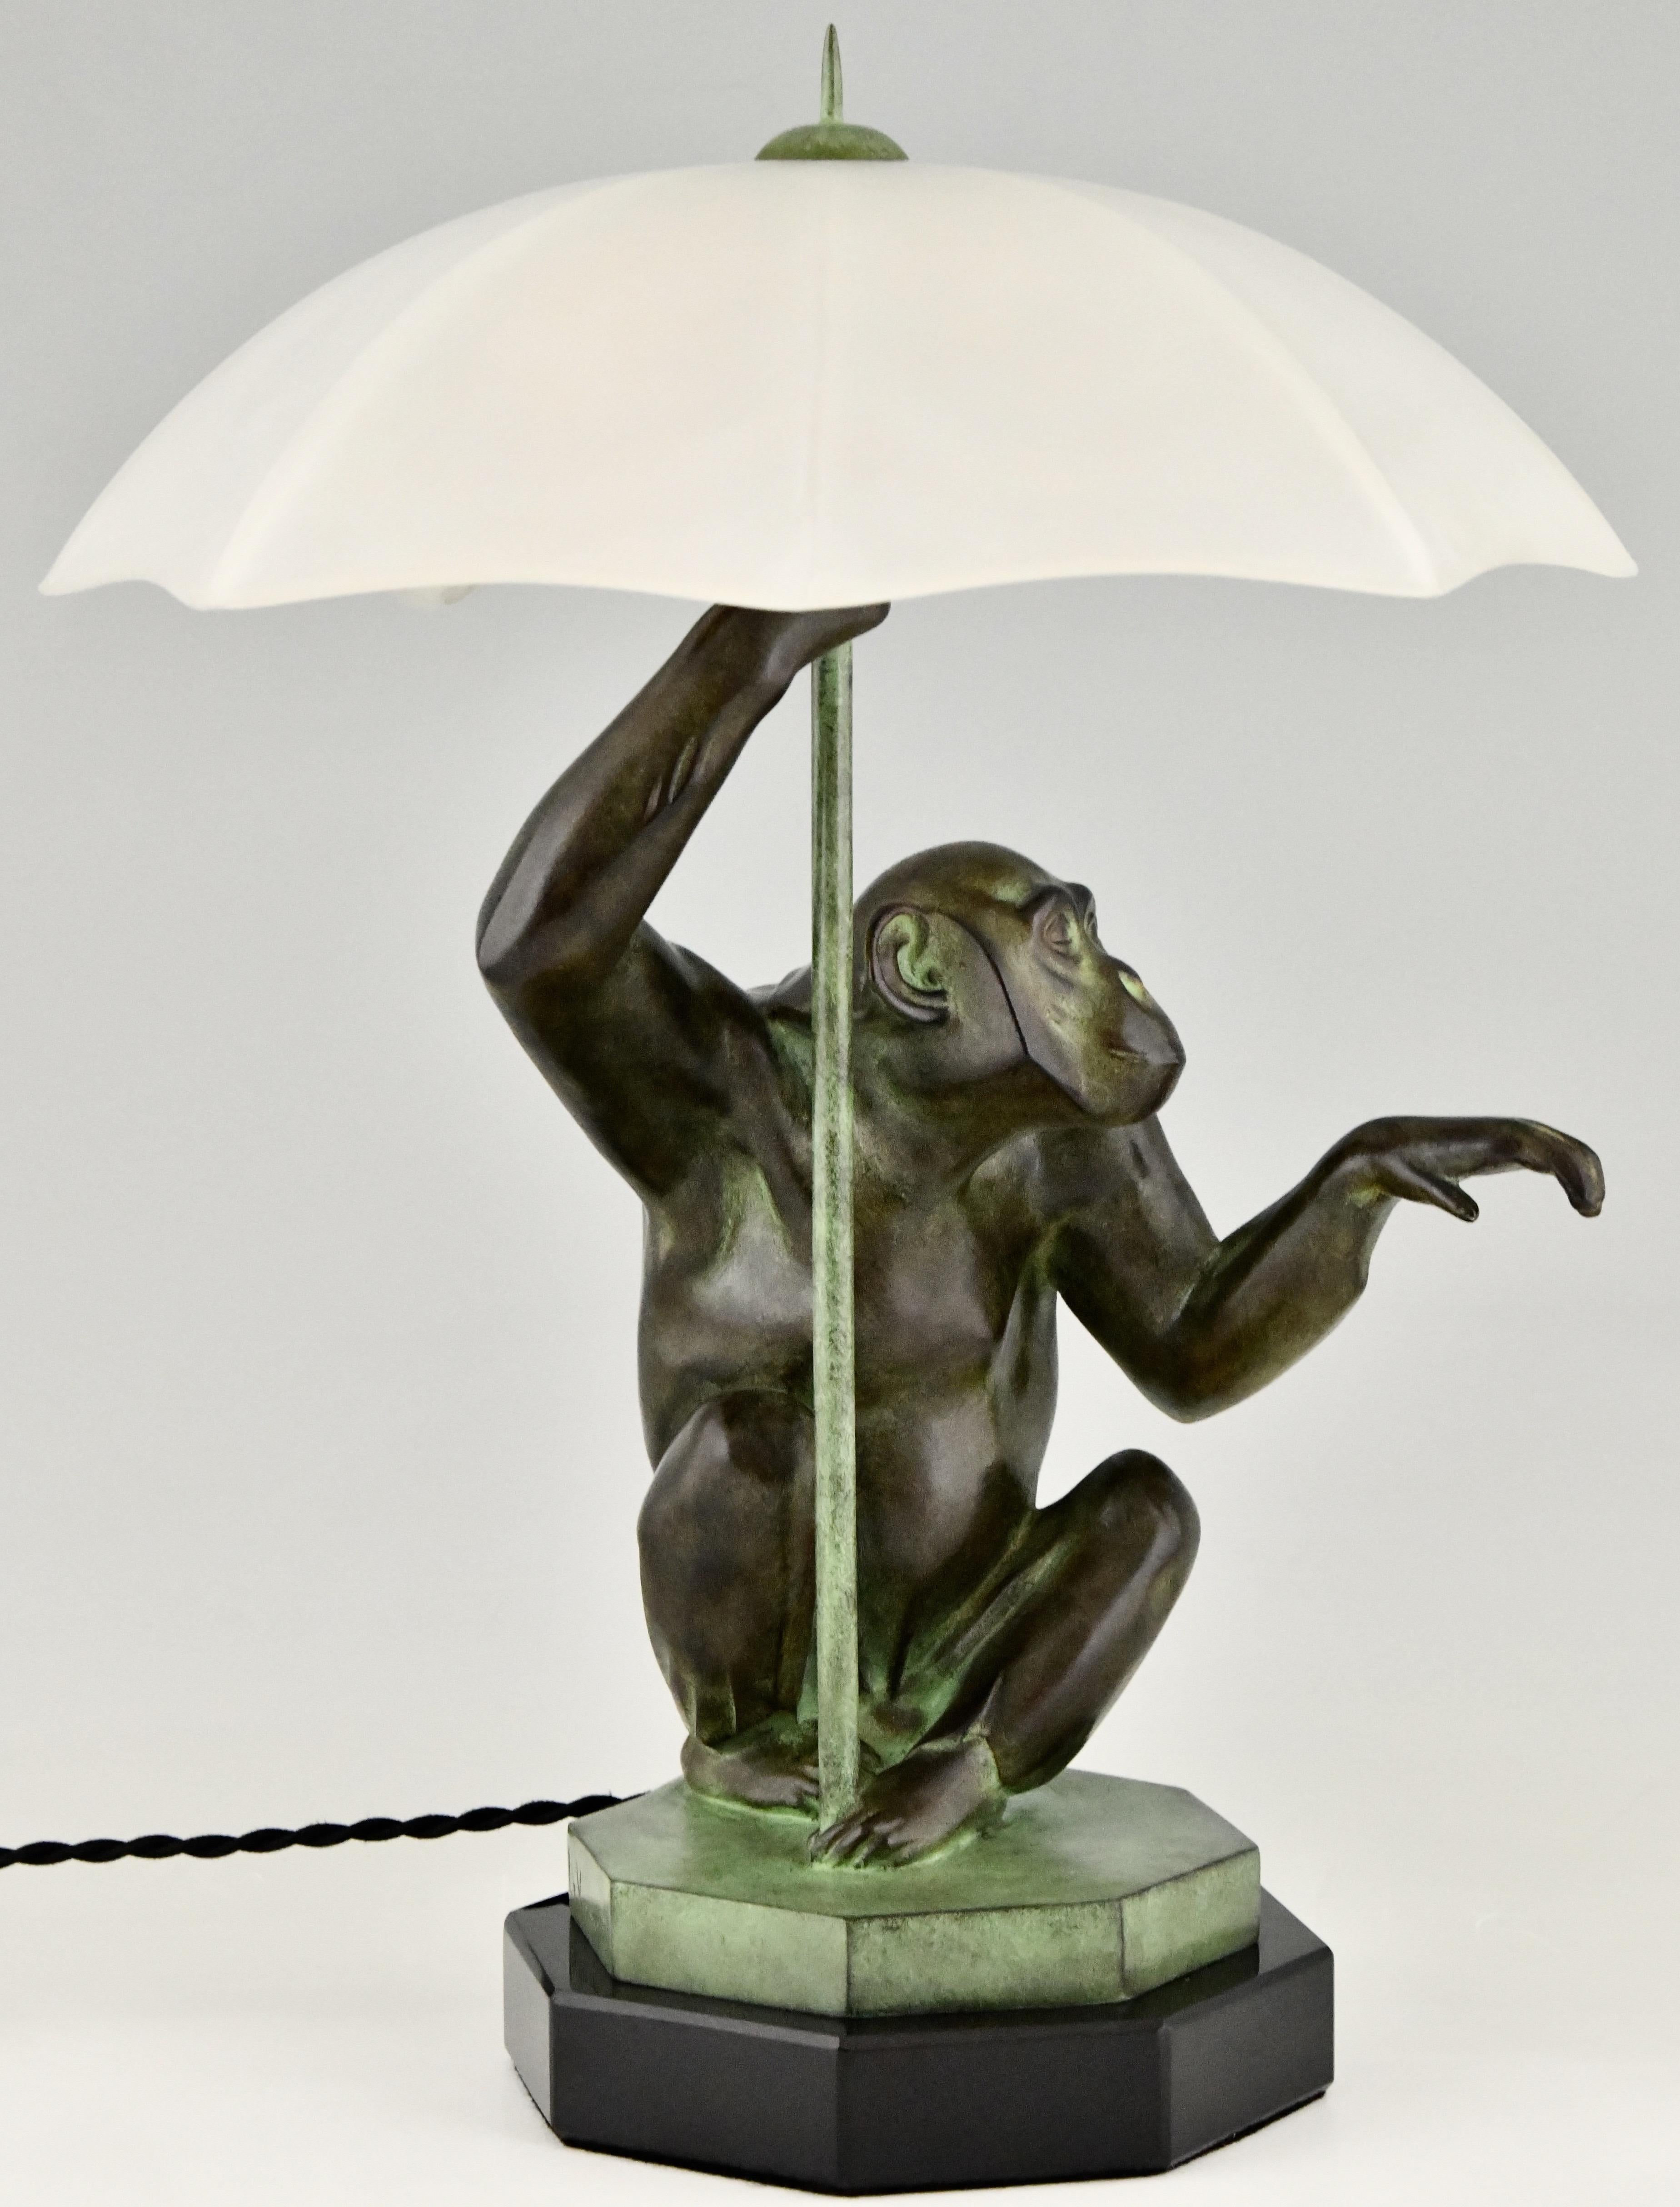 Contemporary Art Deco Style Table Lamp Monkey with Umbrella by Max Le Verrier, France For Sale